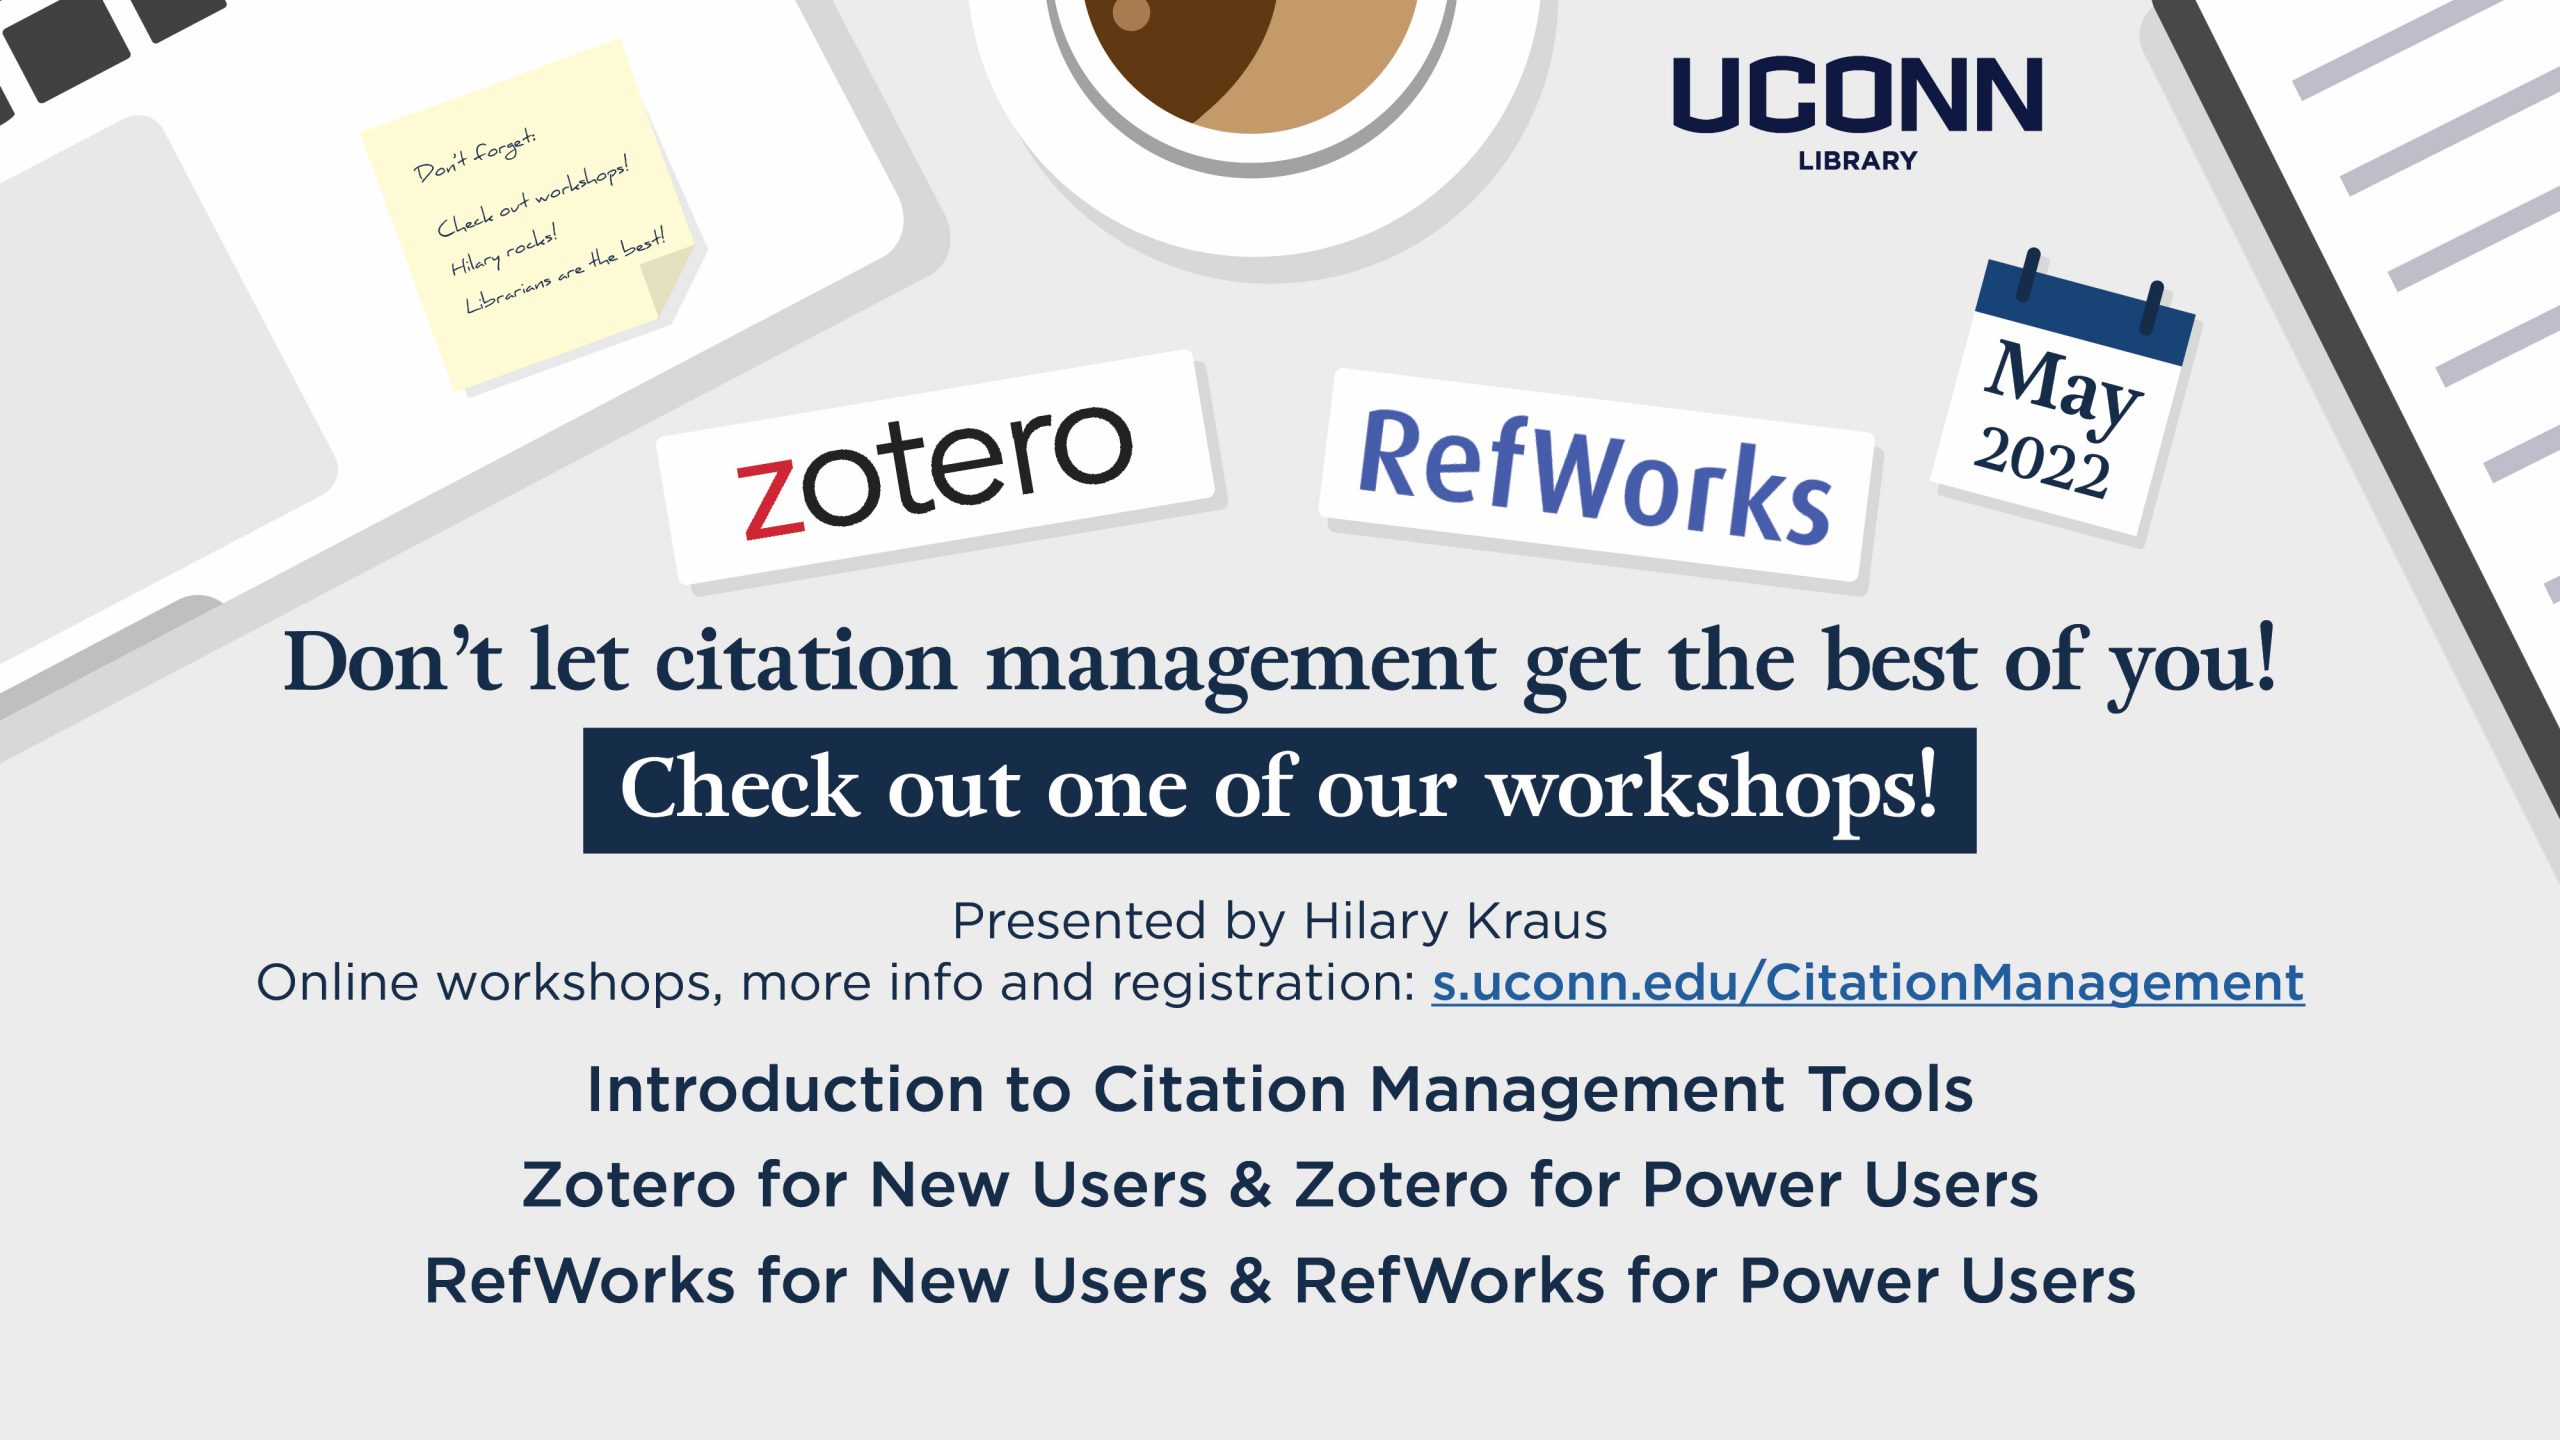 Don’t let citation management get the best of you! Check out one of our workshops! Presented by Hilary Kraus Online workshops, more info and registration: s.uconn.edu/CitationManagement Introduction to Citation Management Tools Zotero for New Users & Zotero for Power Users RefWorks for New Users & RefWorks for Power Users